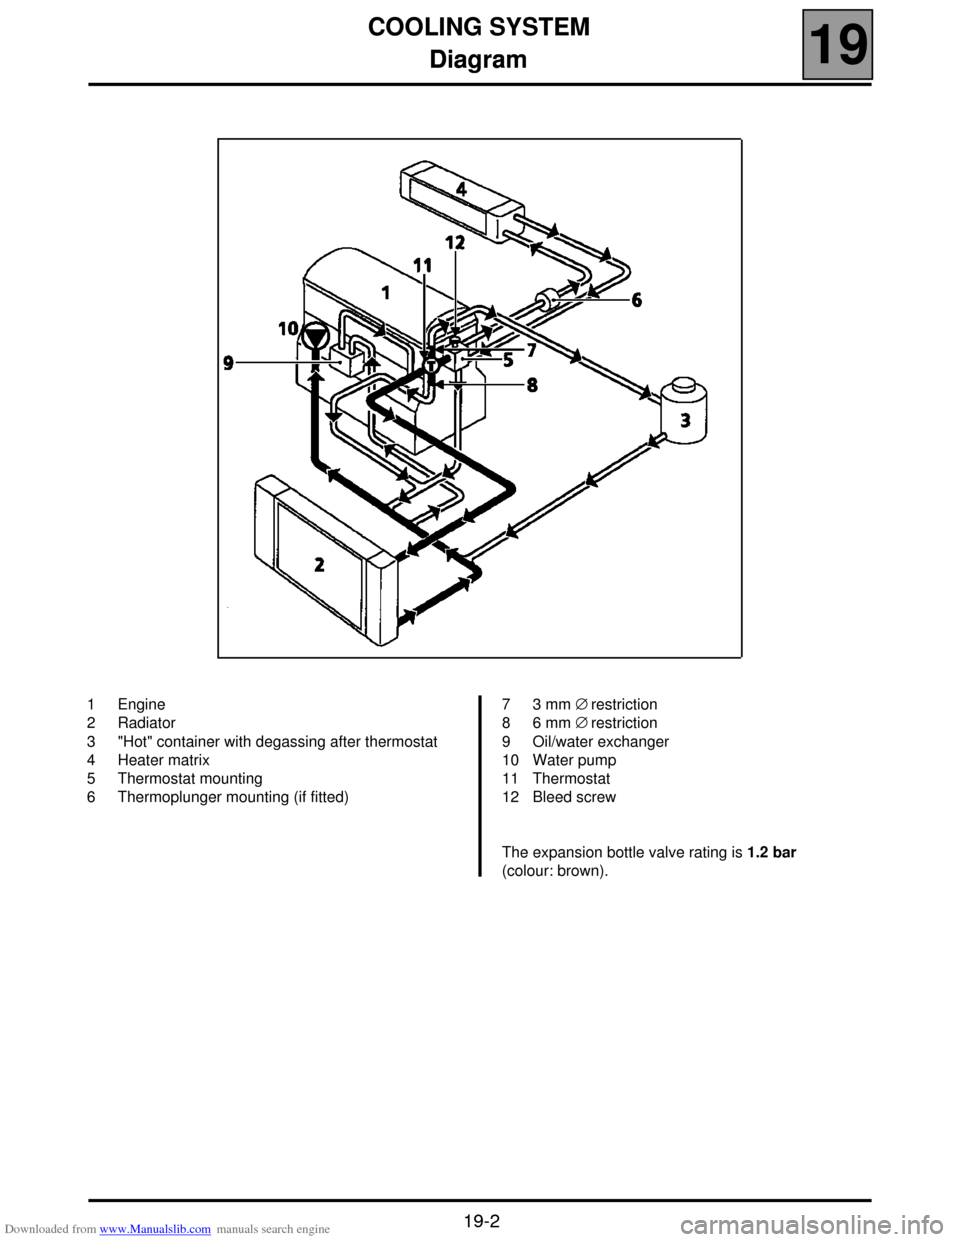 RENAULT SCENIC 2000 J64 / 1.G Technical Note 3426A Workshop Manual Downloaded from www.Manualslib.com manuals search engine COOLING SYSTEM
Diagram
19
19-2
Diagram
1 Engine
2 Radiator
3 "Hot" container with degassing after thermostat
4 Heater matrix
5 Thermostat mount